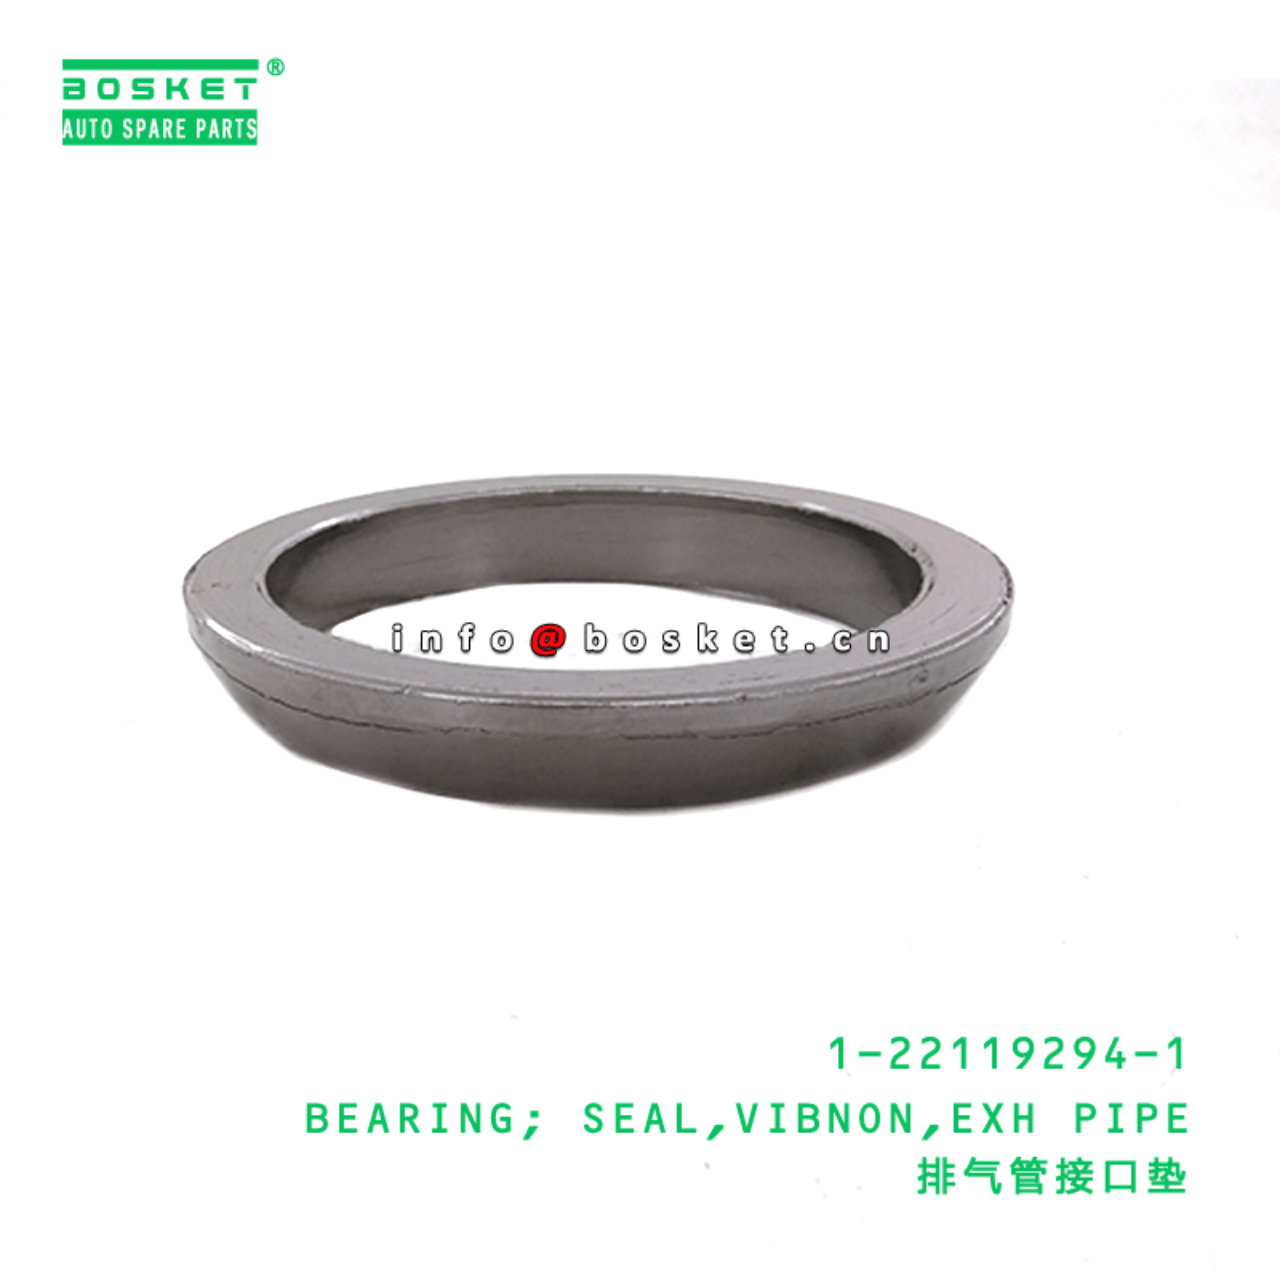 1-22119294-1 Exhaust Pipe Vibnon Seal Bearing 1221192941 Suitable 